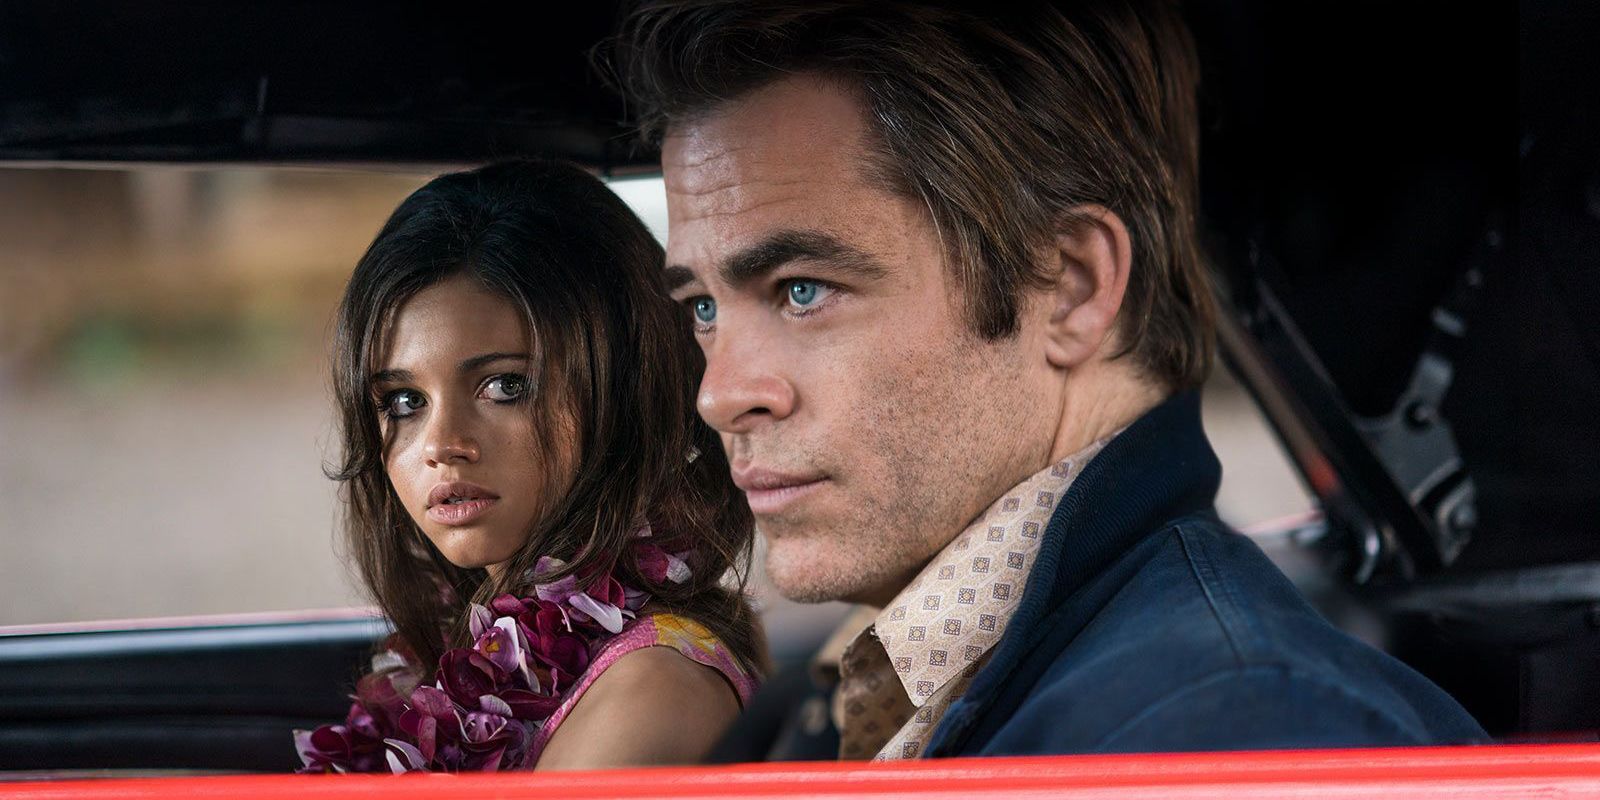 India Eisley and Chris Pine in I Am the Night